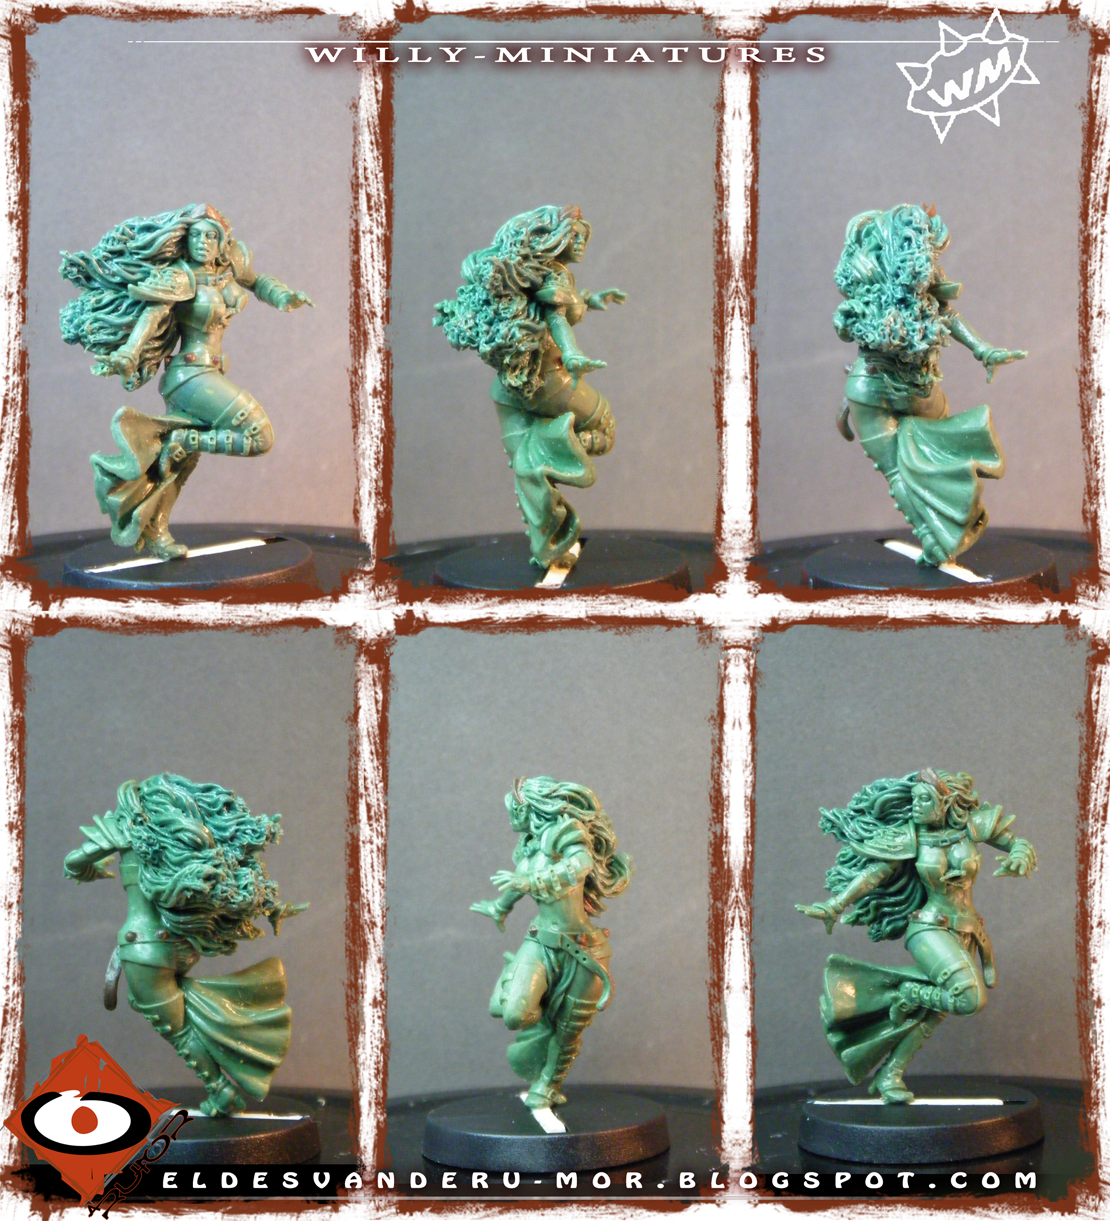 Several views of miniature of blood bowl witch elf made by RU-MOR for WILLY Miniatures. Star Player, witch elf, fantasy football